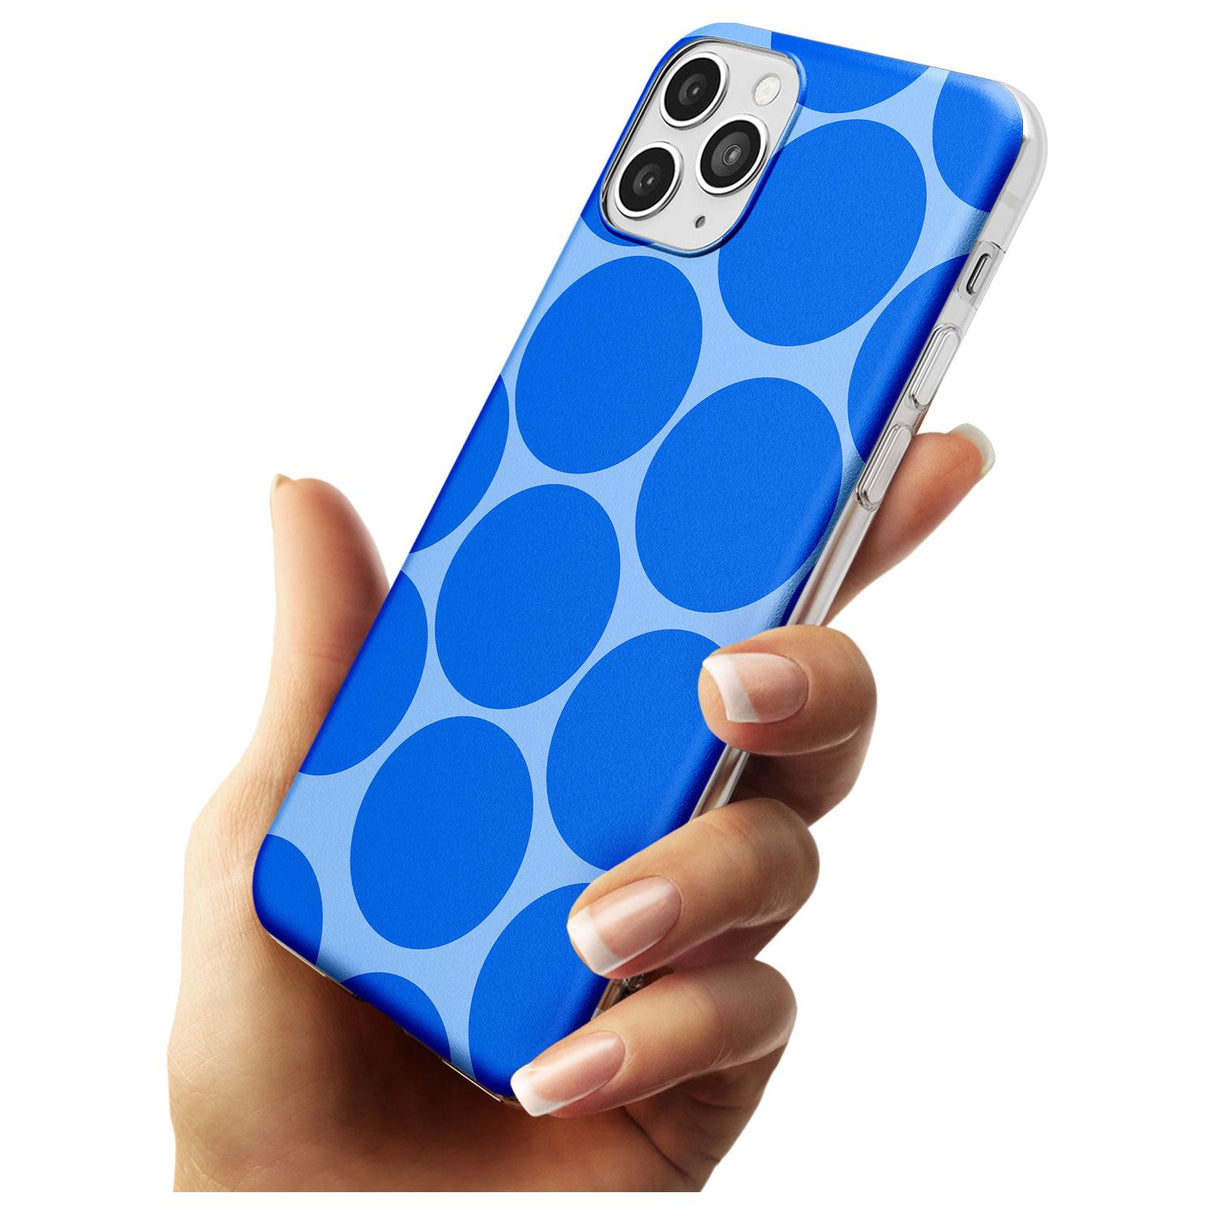 Abstract Retro Shapes: Blue Dots Black Impact Phone Case for iPhone 11 Pro Max